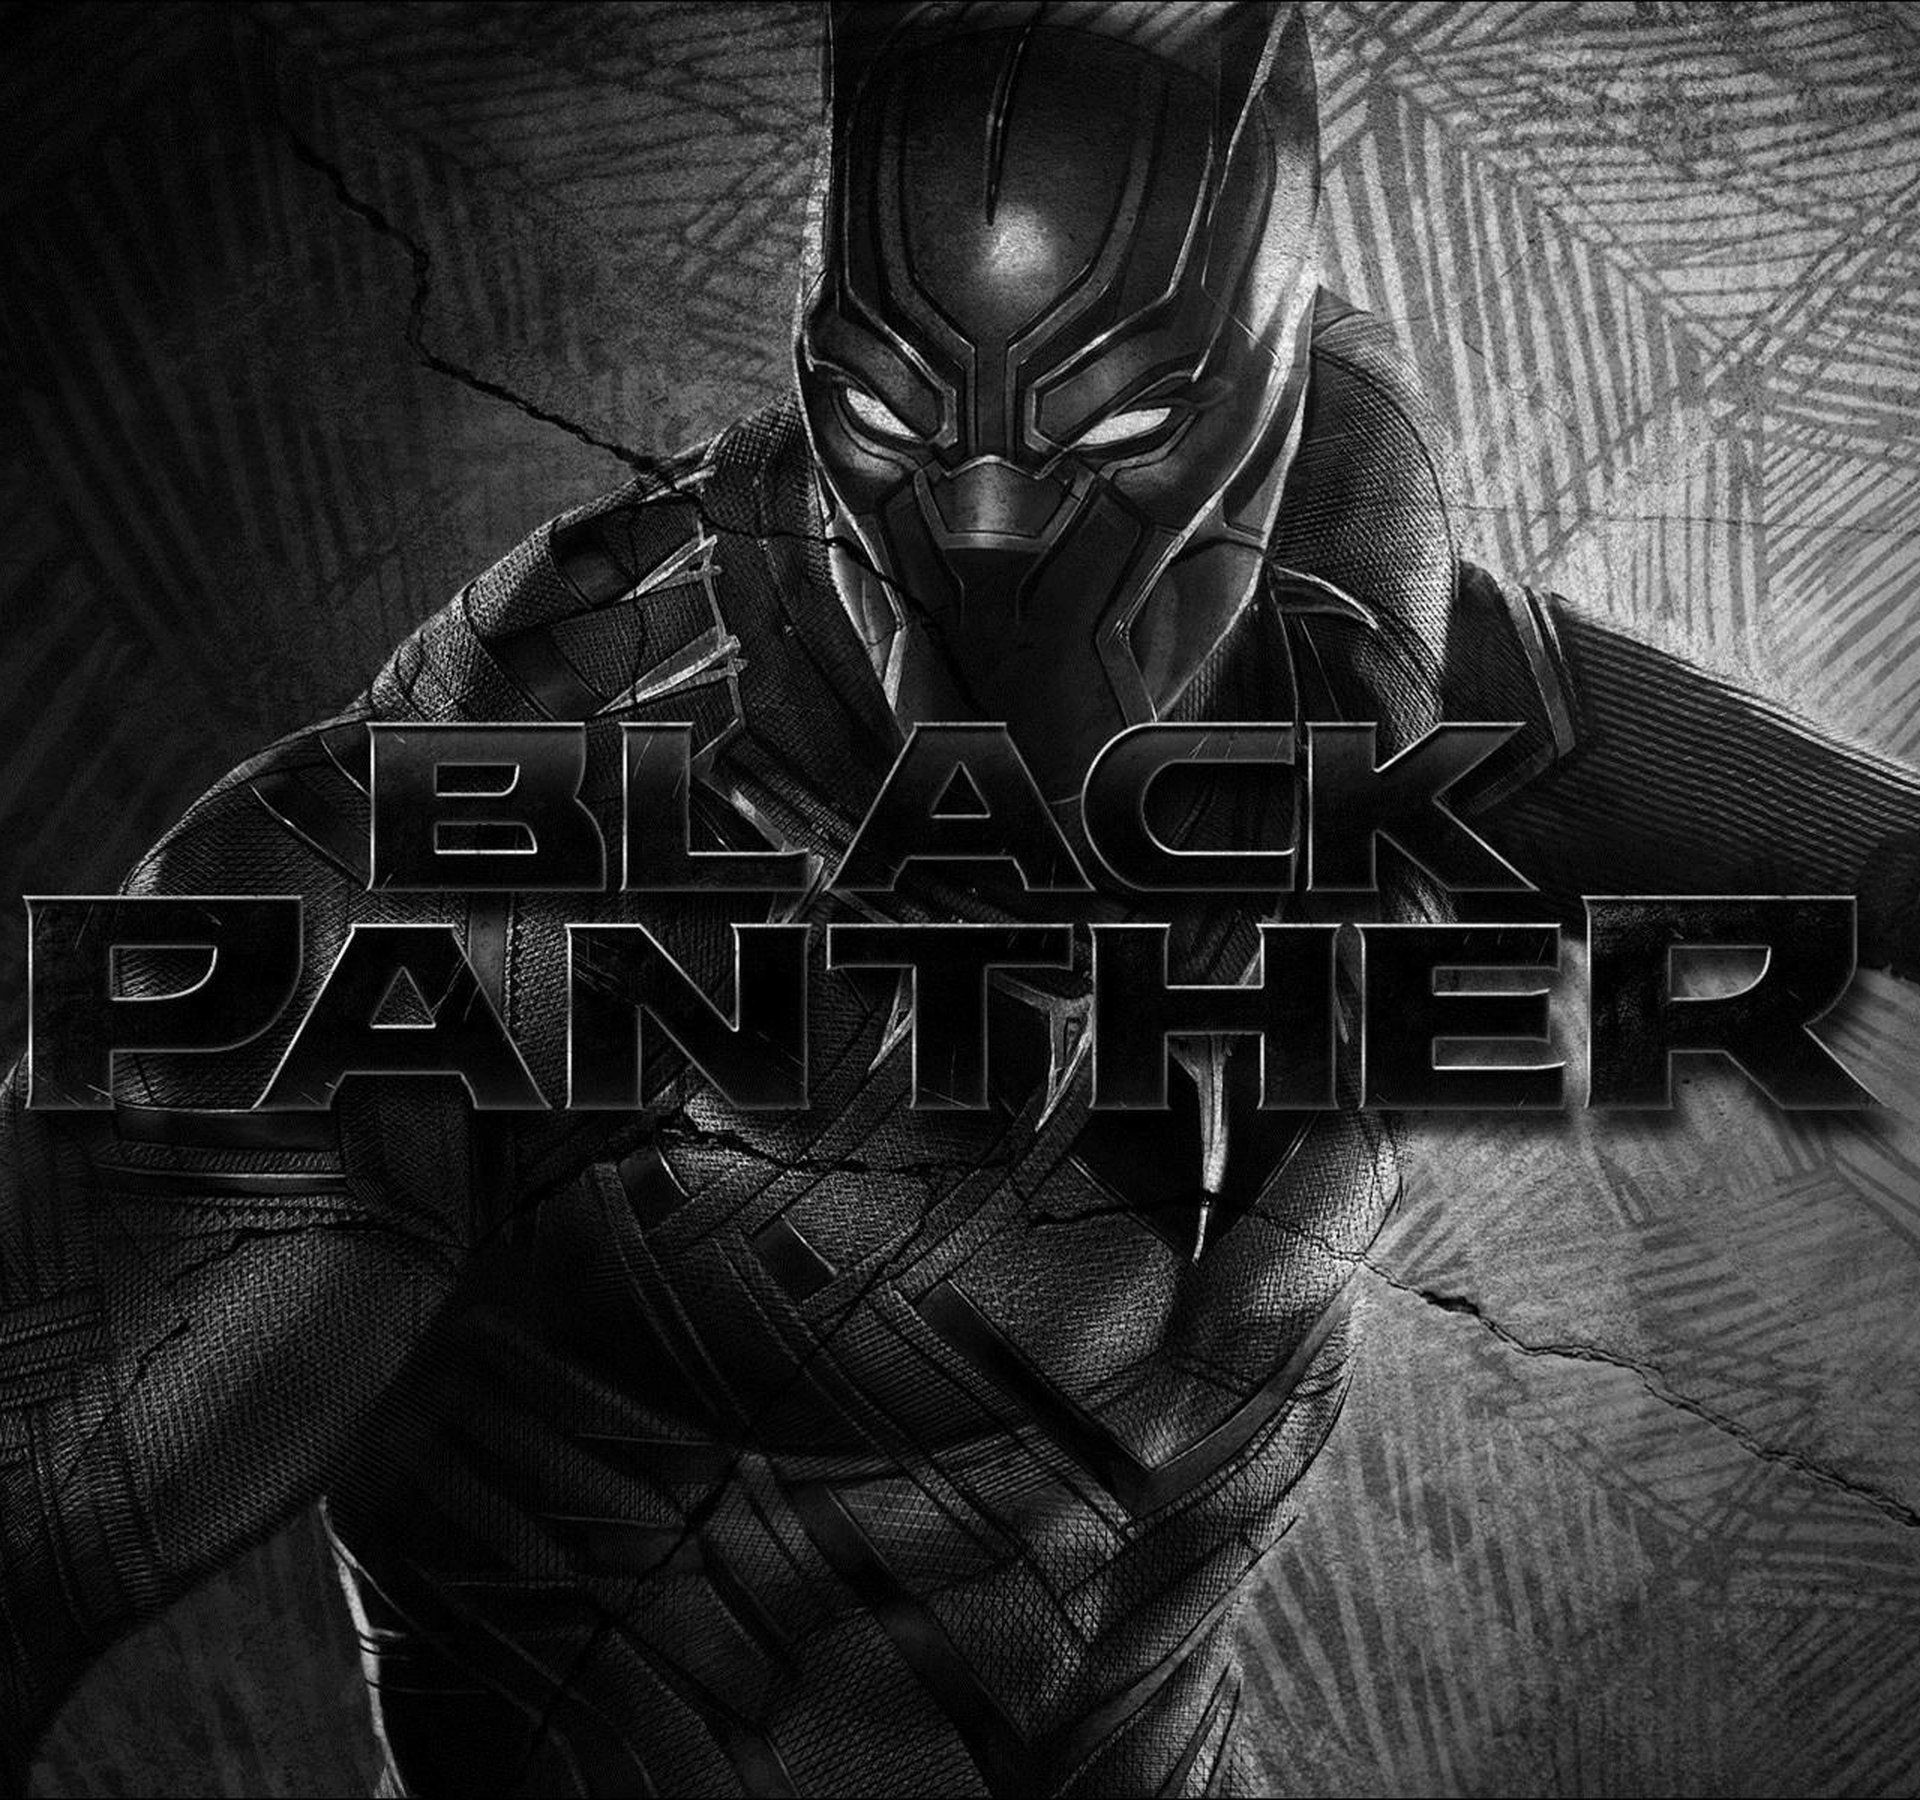 1920x1800 1920x1080 Black Panther images Black Panther 3 HD wallpaper and background  ...">